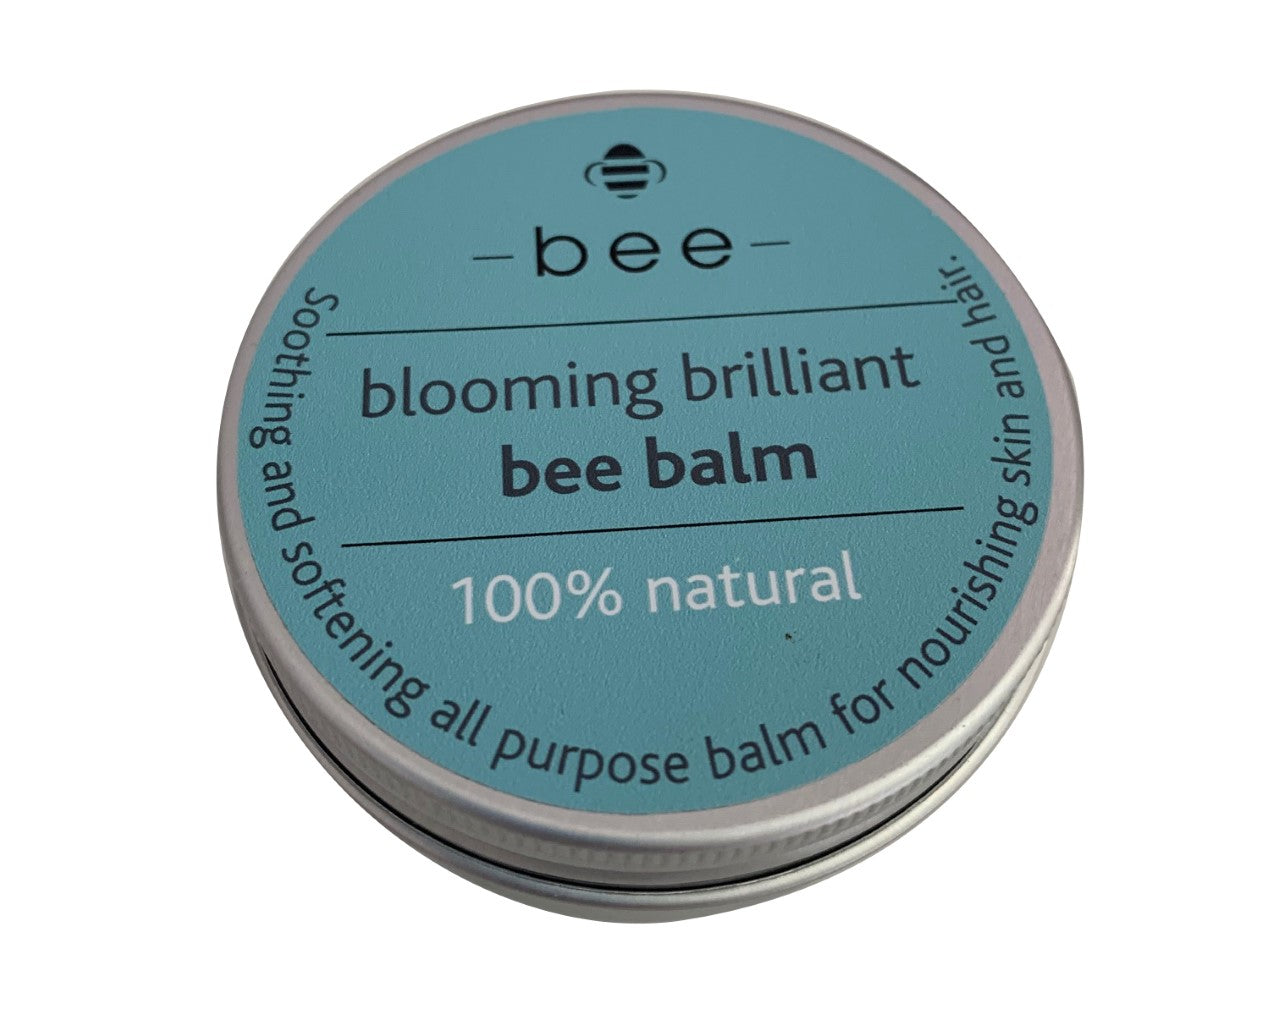 blooming brilliant bee balm